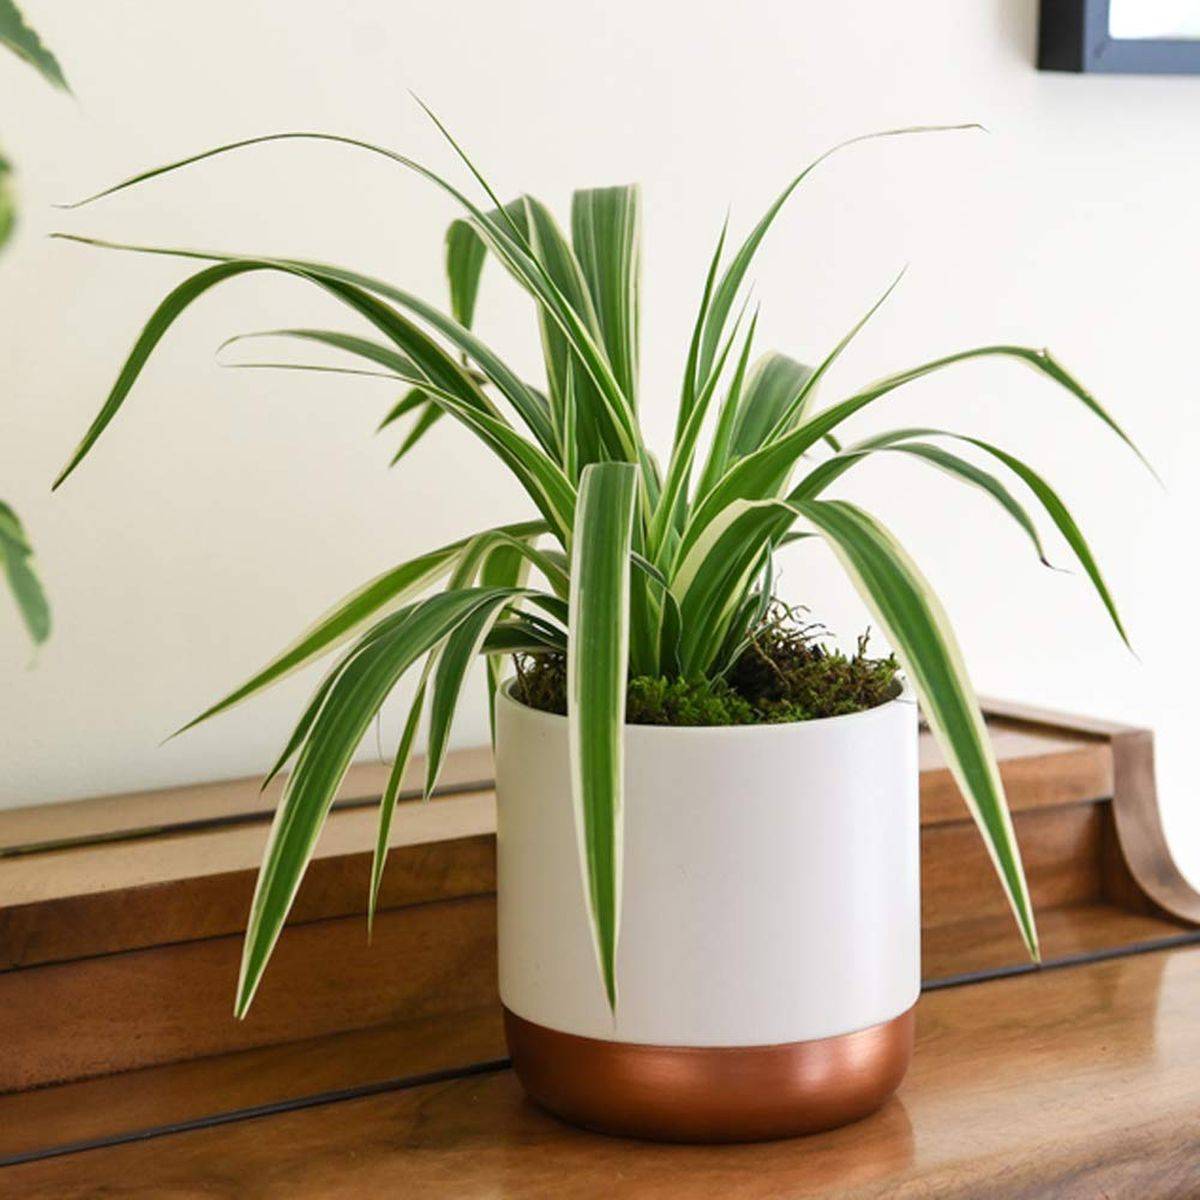 Spider-plant-cleans-the-air-indoor-in-a-style-40900